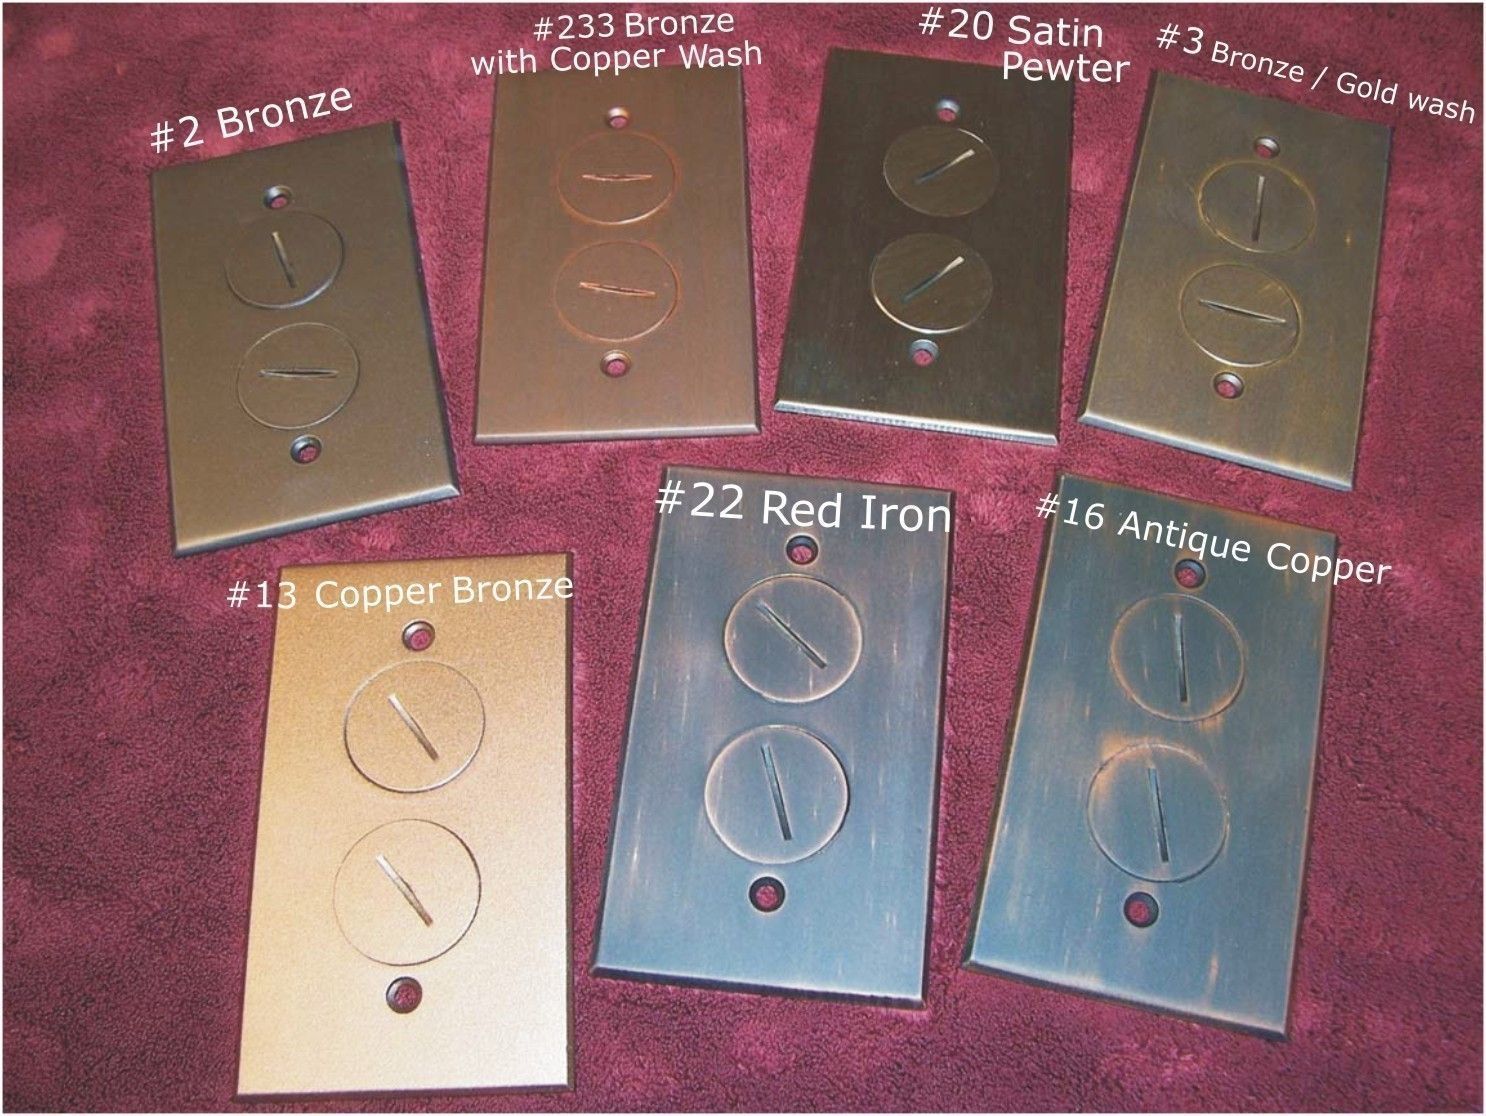 Here are some of our custom 38 finishes we have applied to floor box covers.